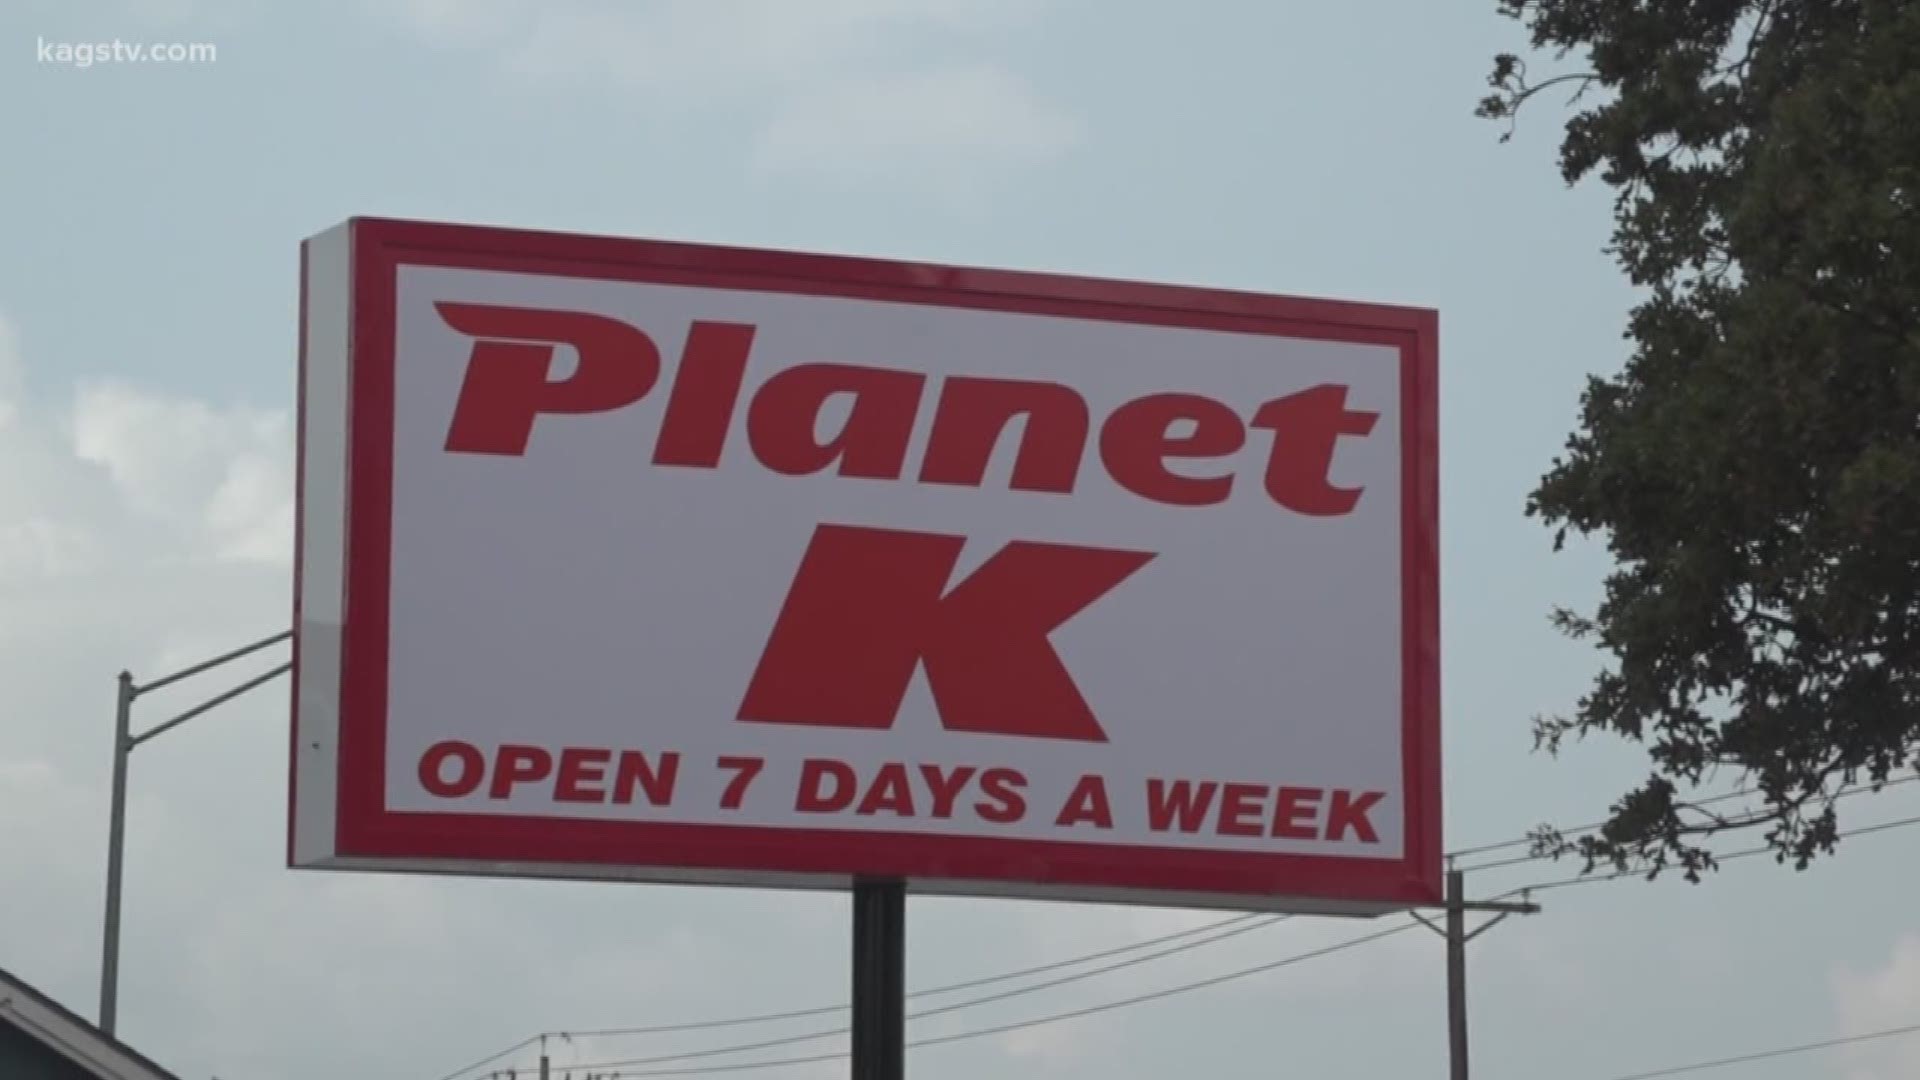 New details in whats been an ongoing saga between the City of Bryan and Planet K. The two may have found some common ground, reaching a settlement in a months long lawsuit.